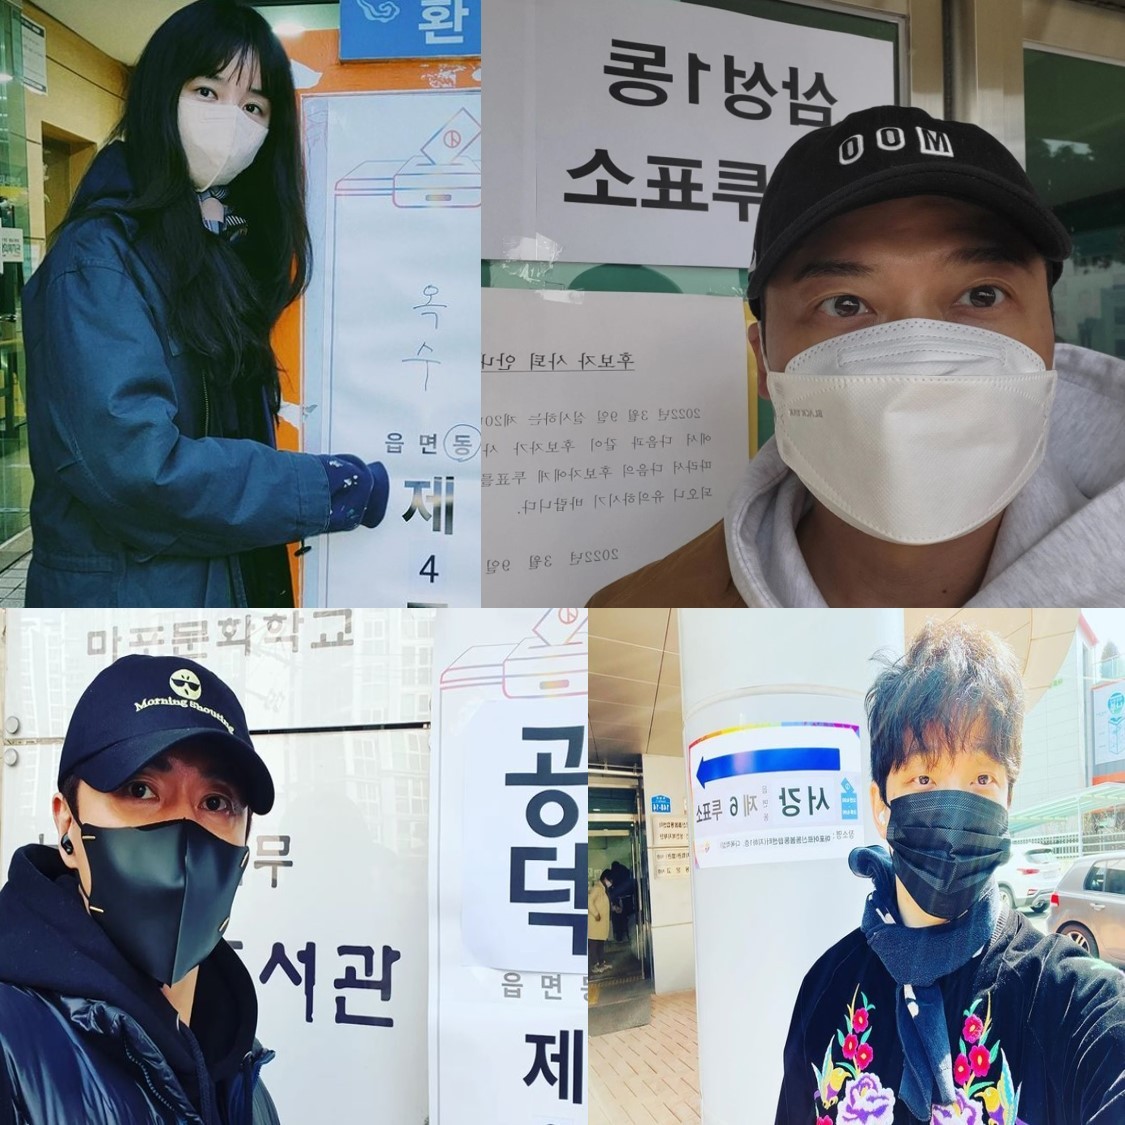 Celebrities encourage voting with post-vote snaps, poll stamps